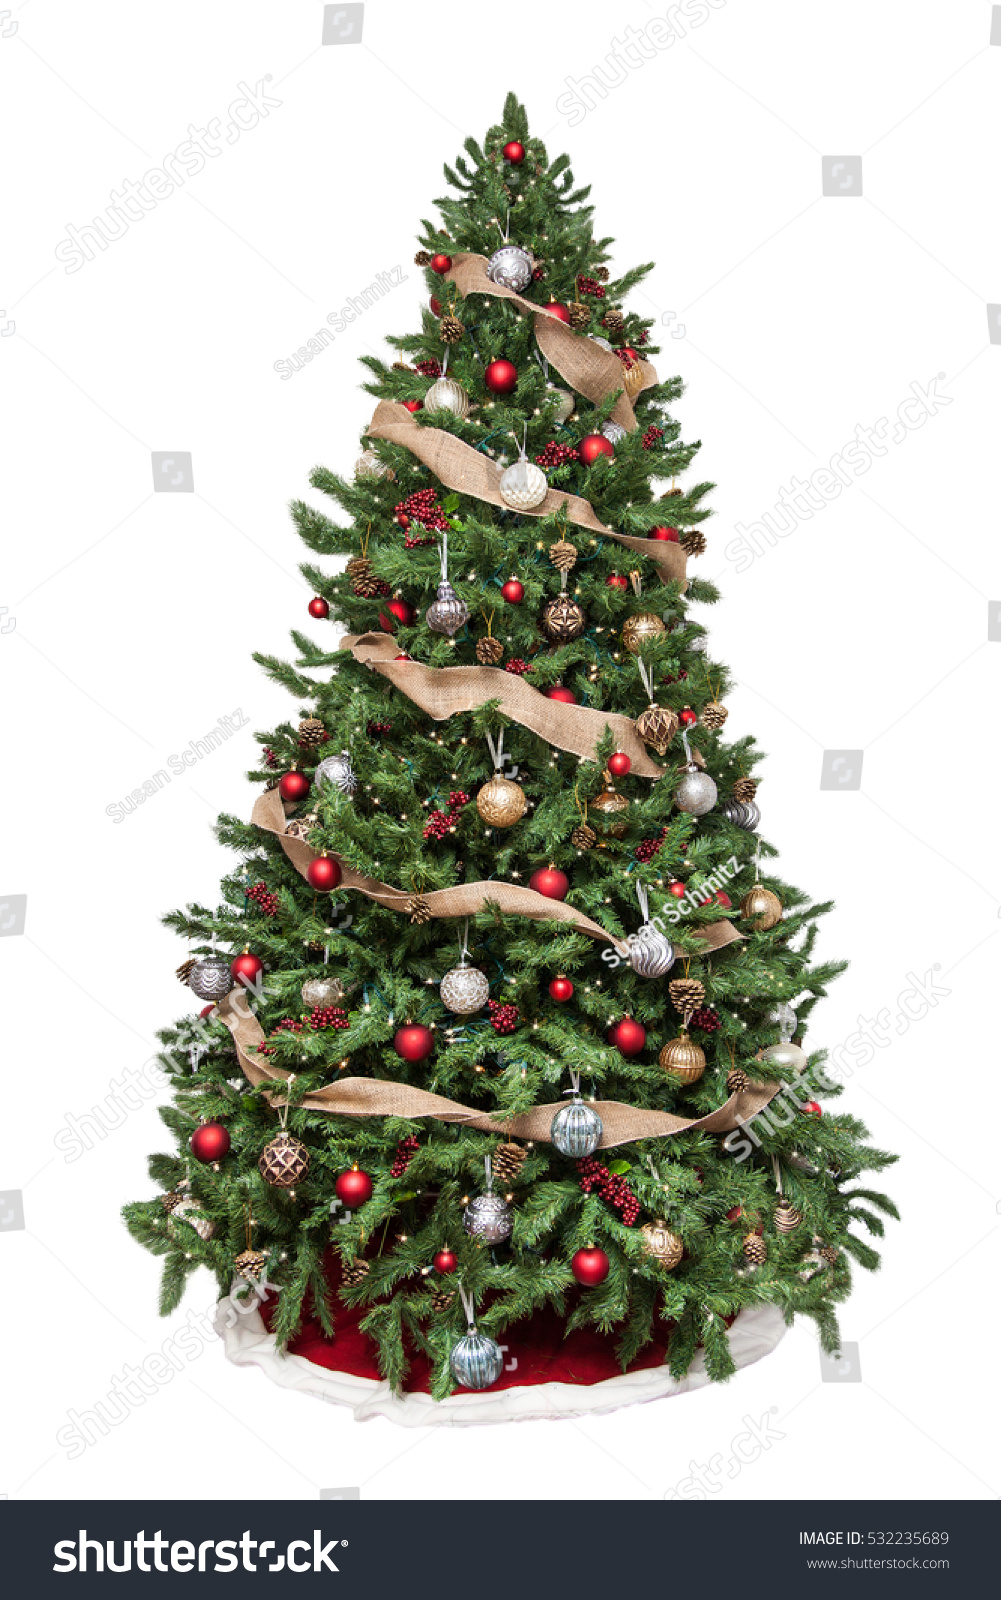 Isolated Christmas tree decorated with ornaments and burlap garland #532235689